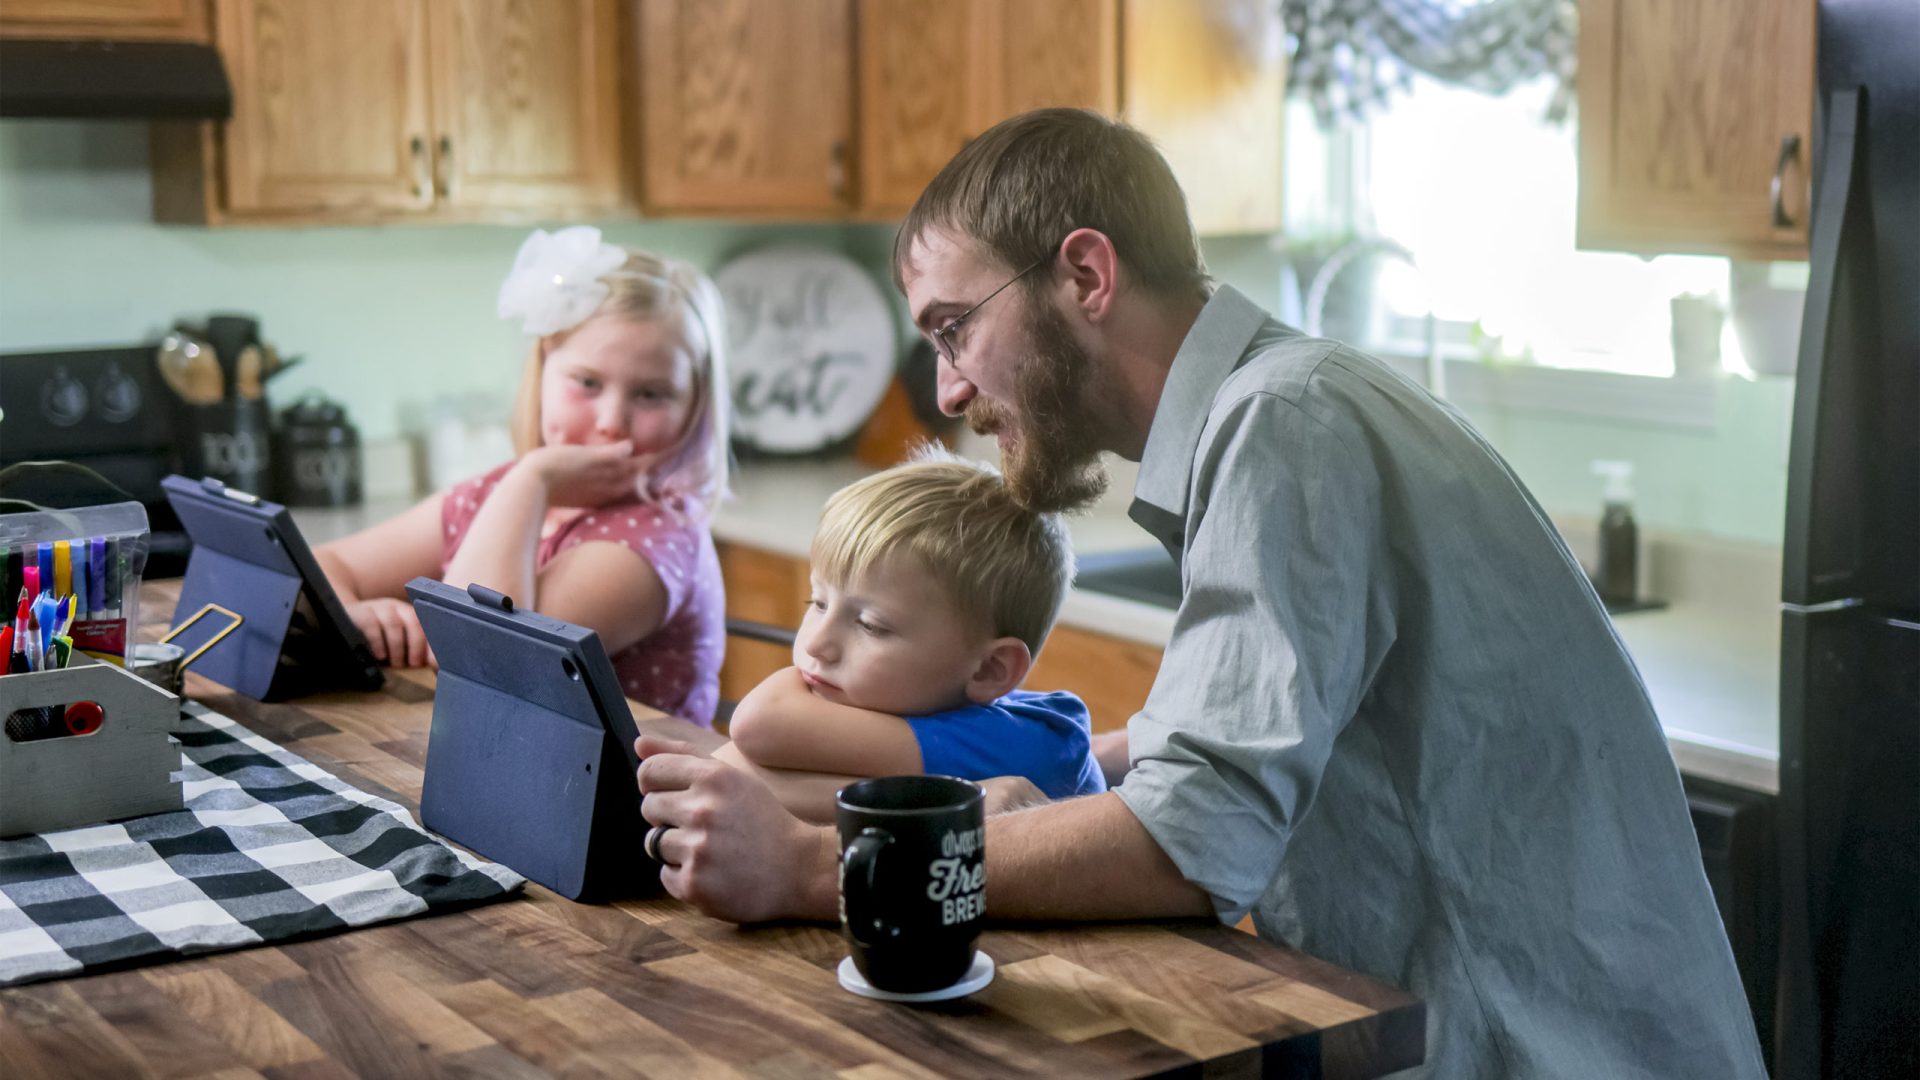 Father helping two children with tablets at kitchen island